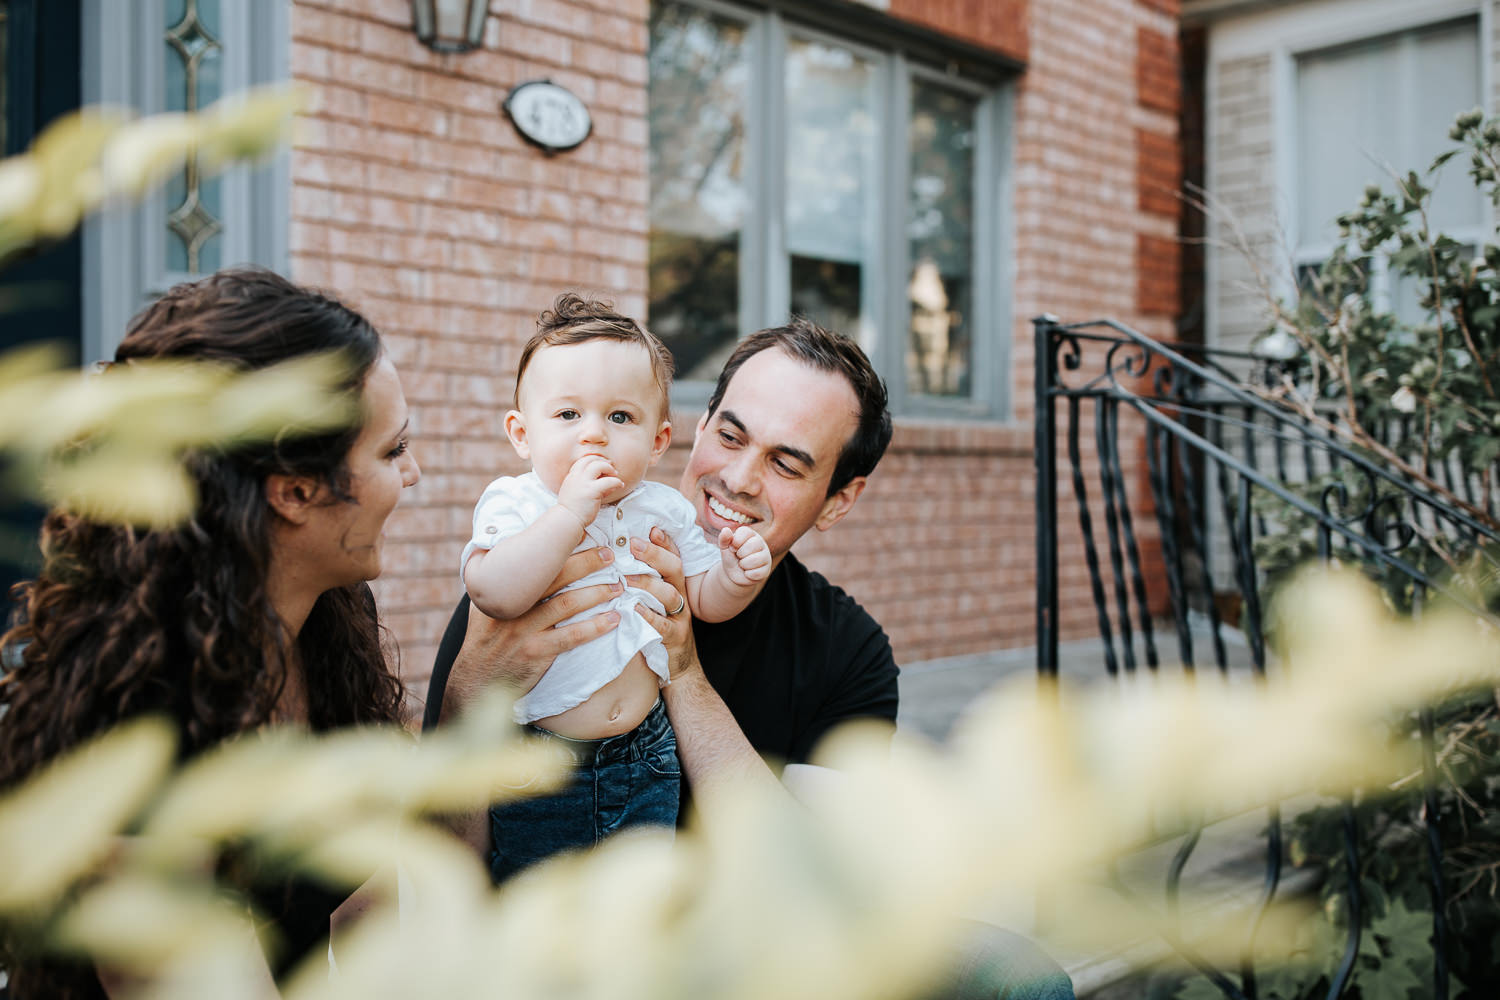 family of 3 sitting on front porch, 9 month old baby boy with dark hair in white t-shirt and jeans standing in dad's lap, mom smiling at son and husband - York Region Golden Hour Photography